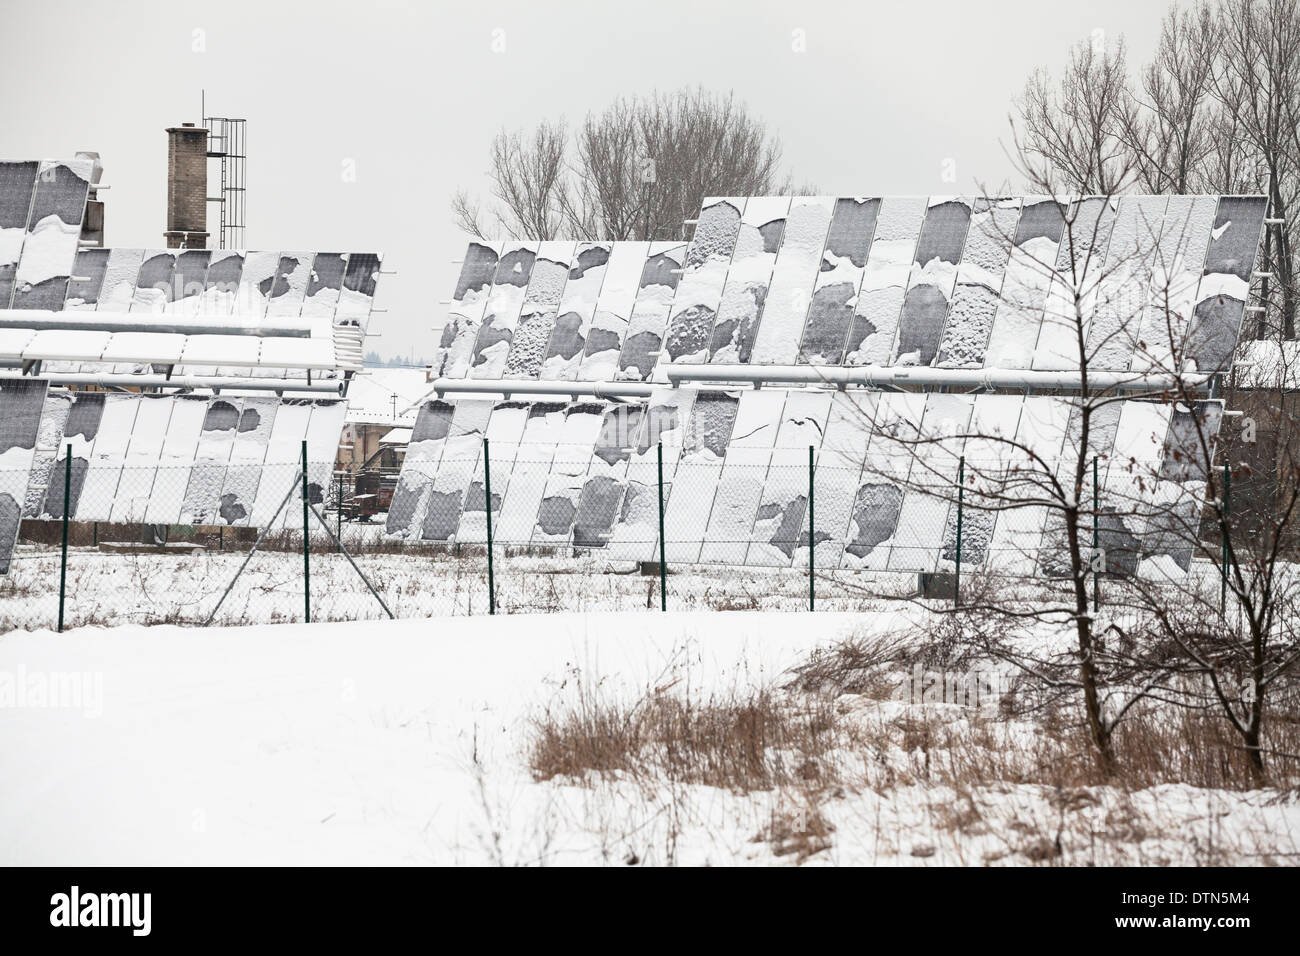 Photovoltaic solar panels covered by snow in winter. Stock Photo